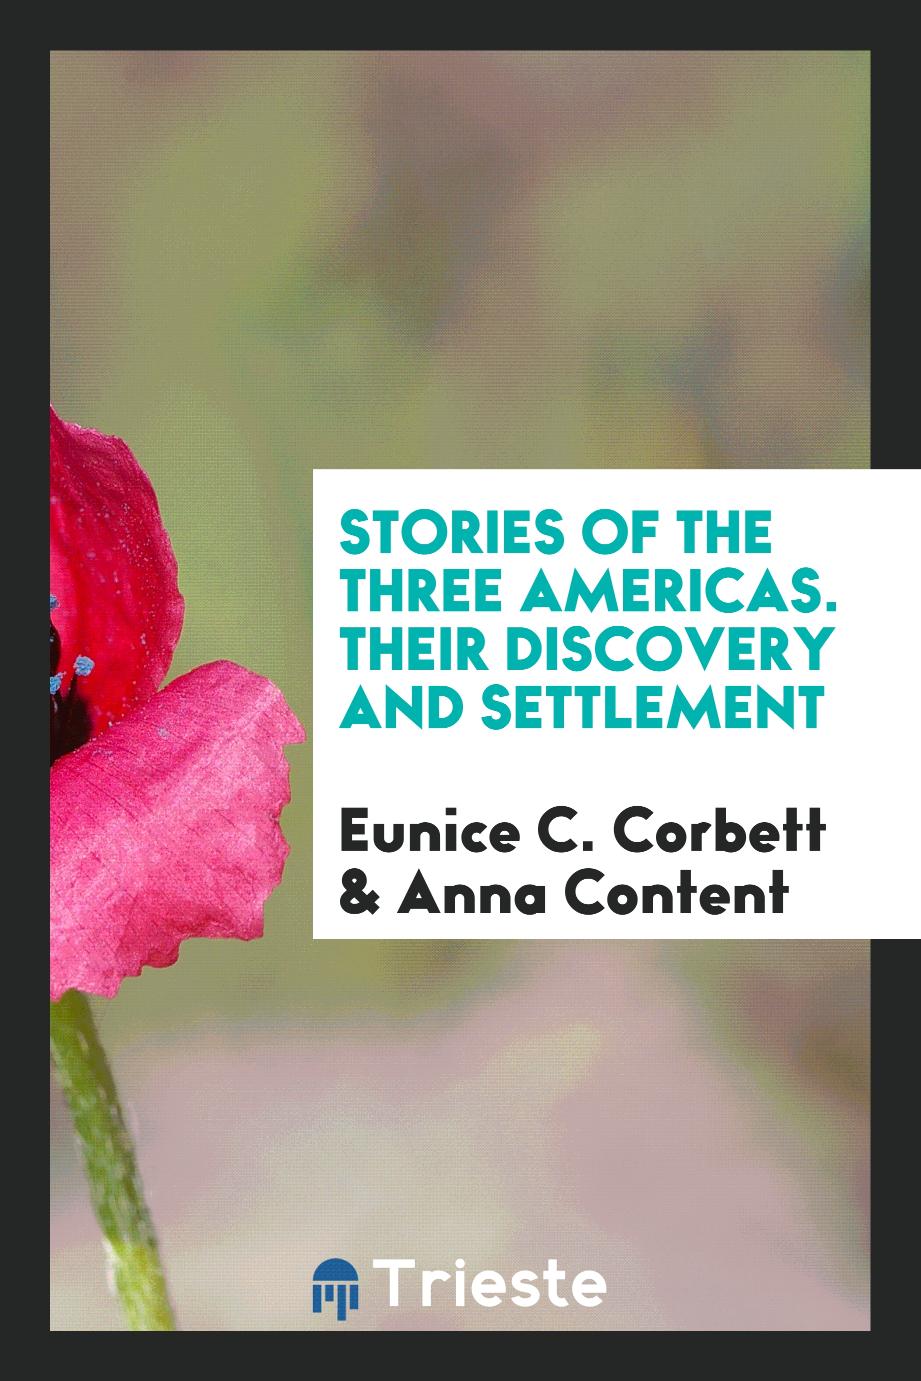 Stories of the Three Americas. Their Discovery and Settlement